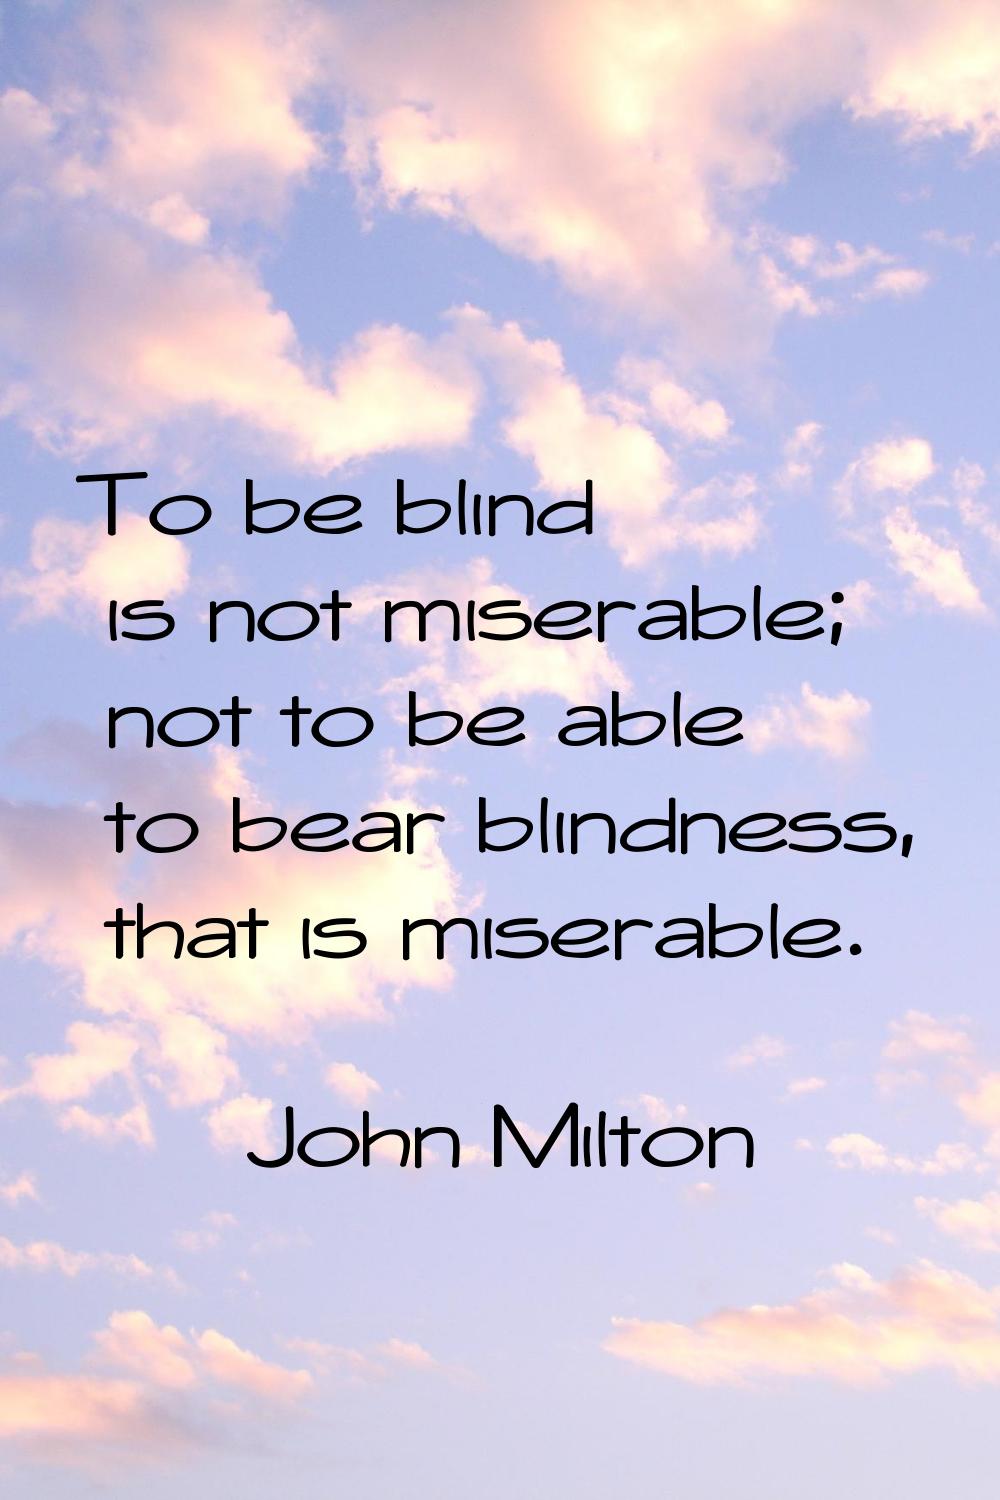 To be blind is not miserable; not to be able to bear blindness, that is miserable.